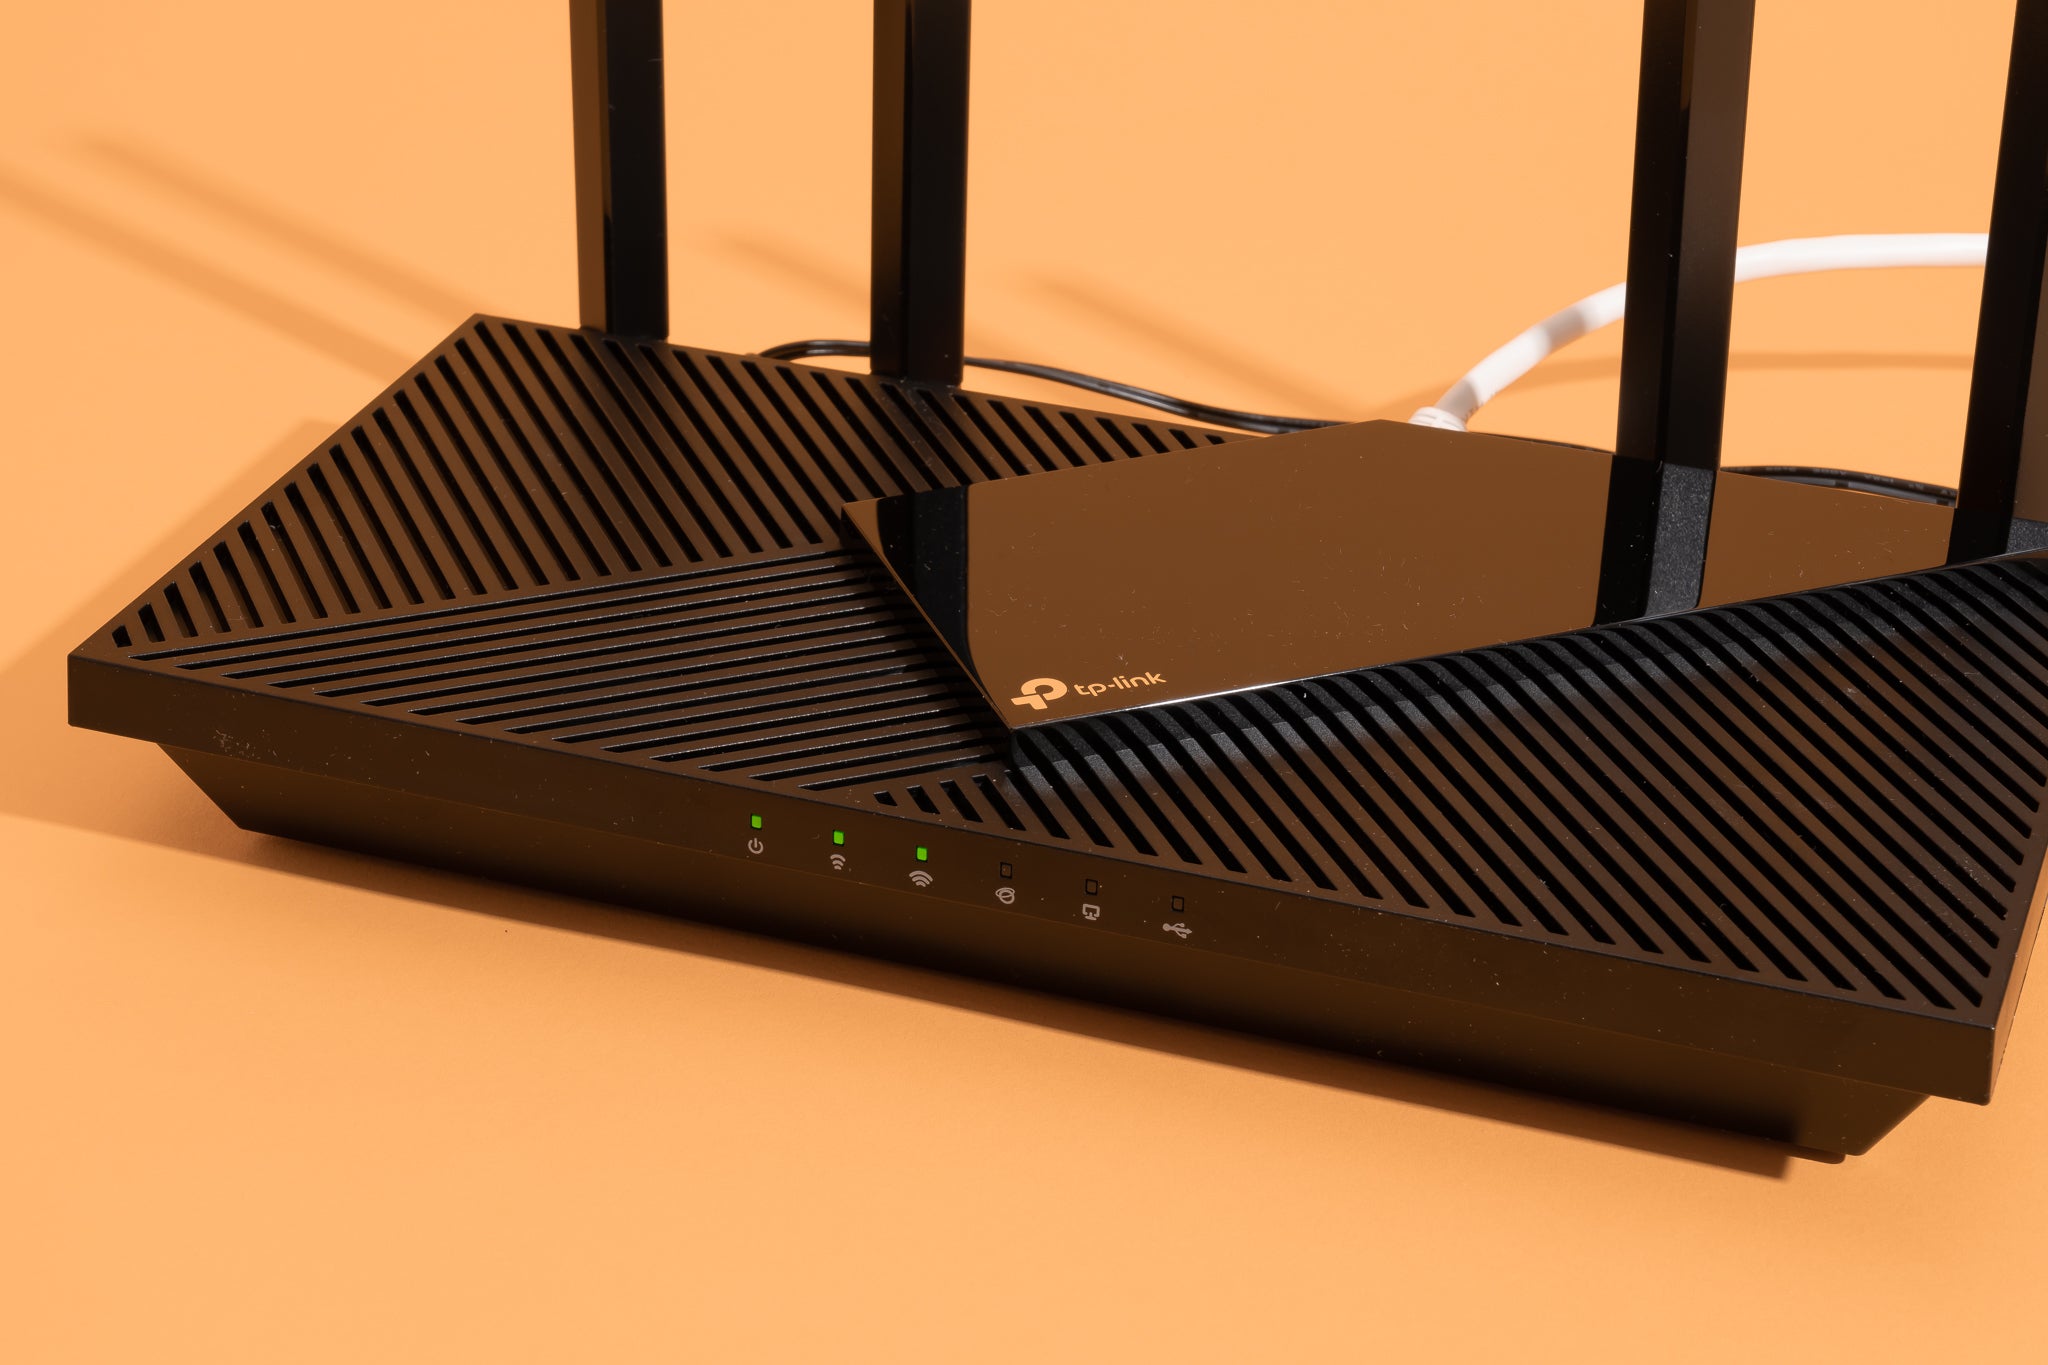 How To Configure TP-Link Wi-Fi Router Step By Step